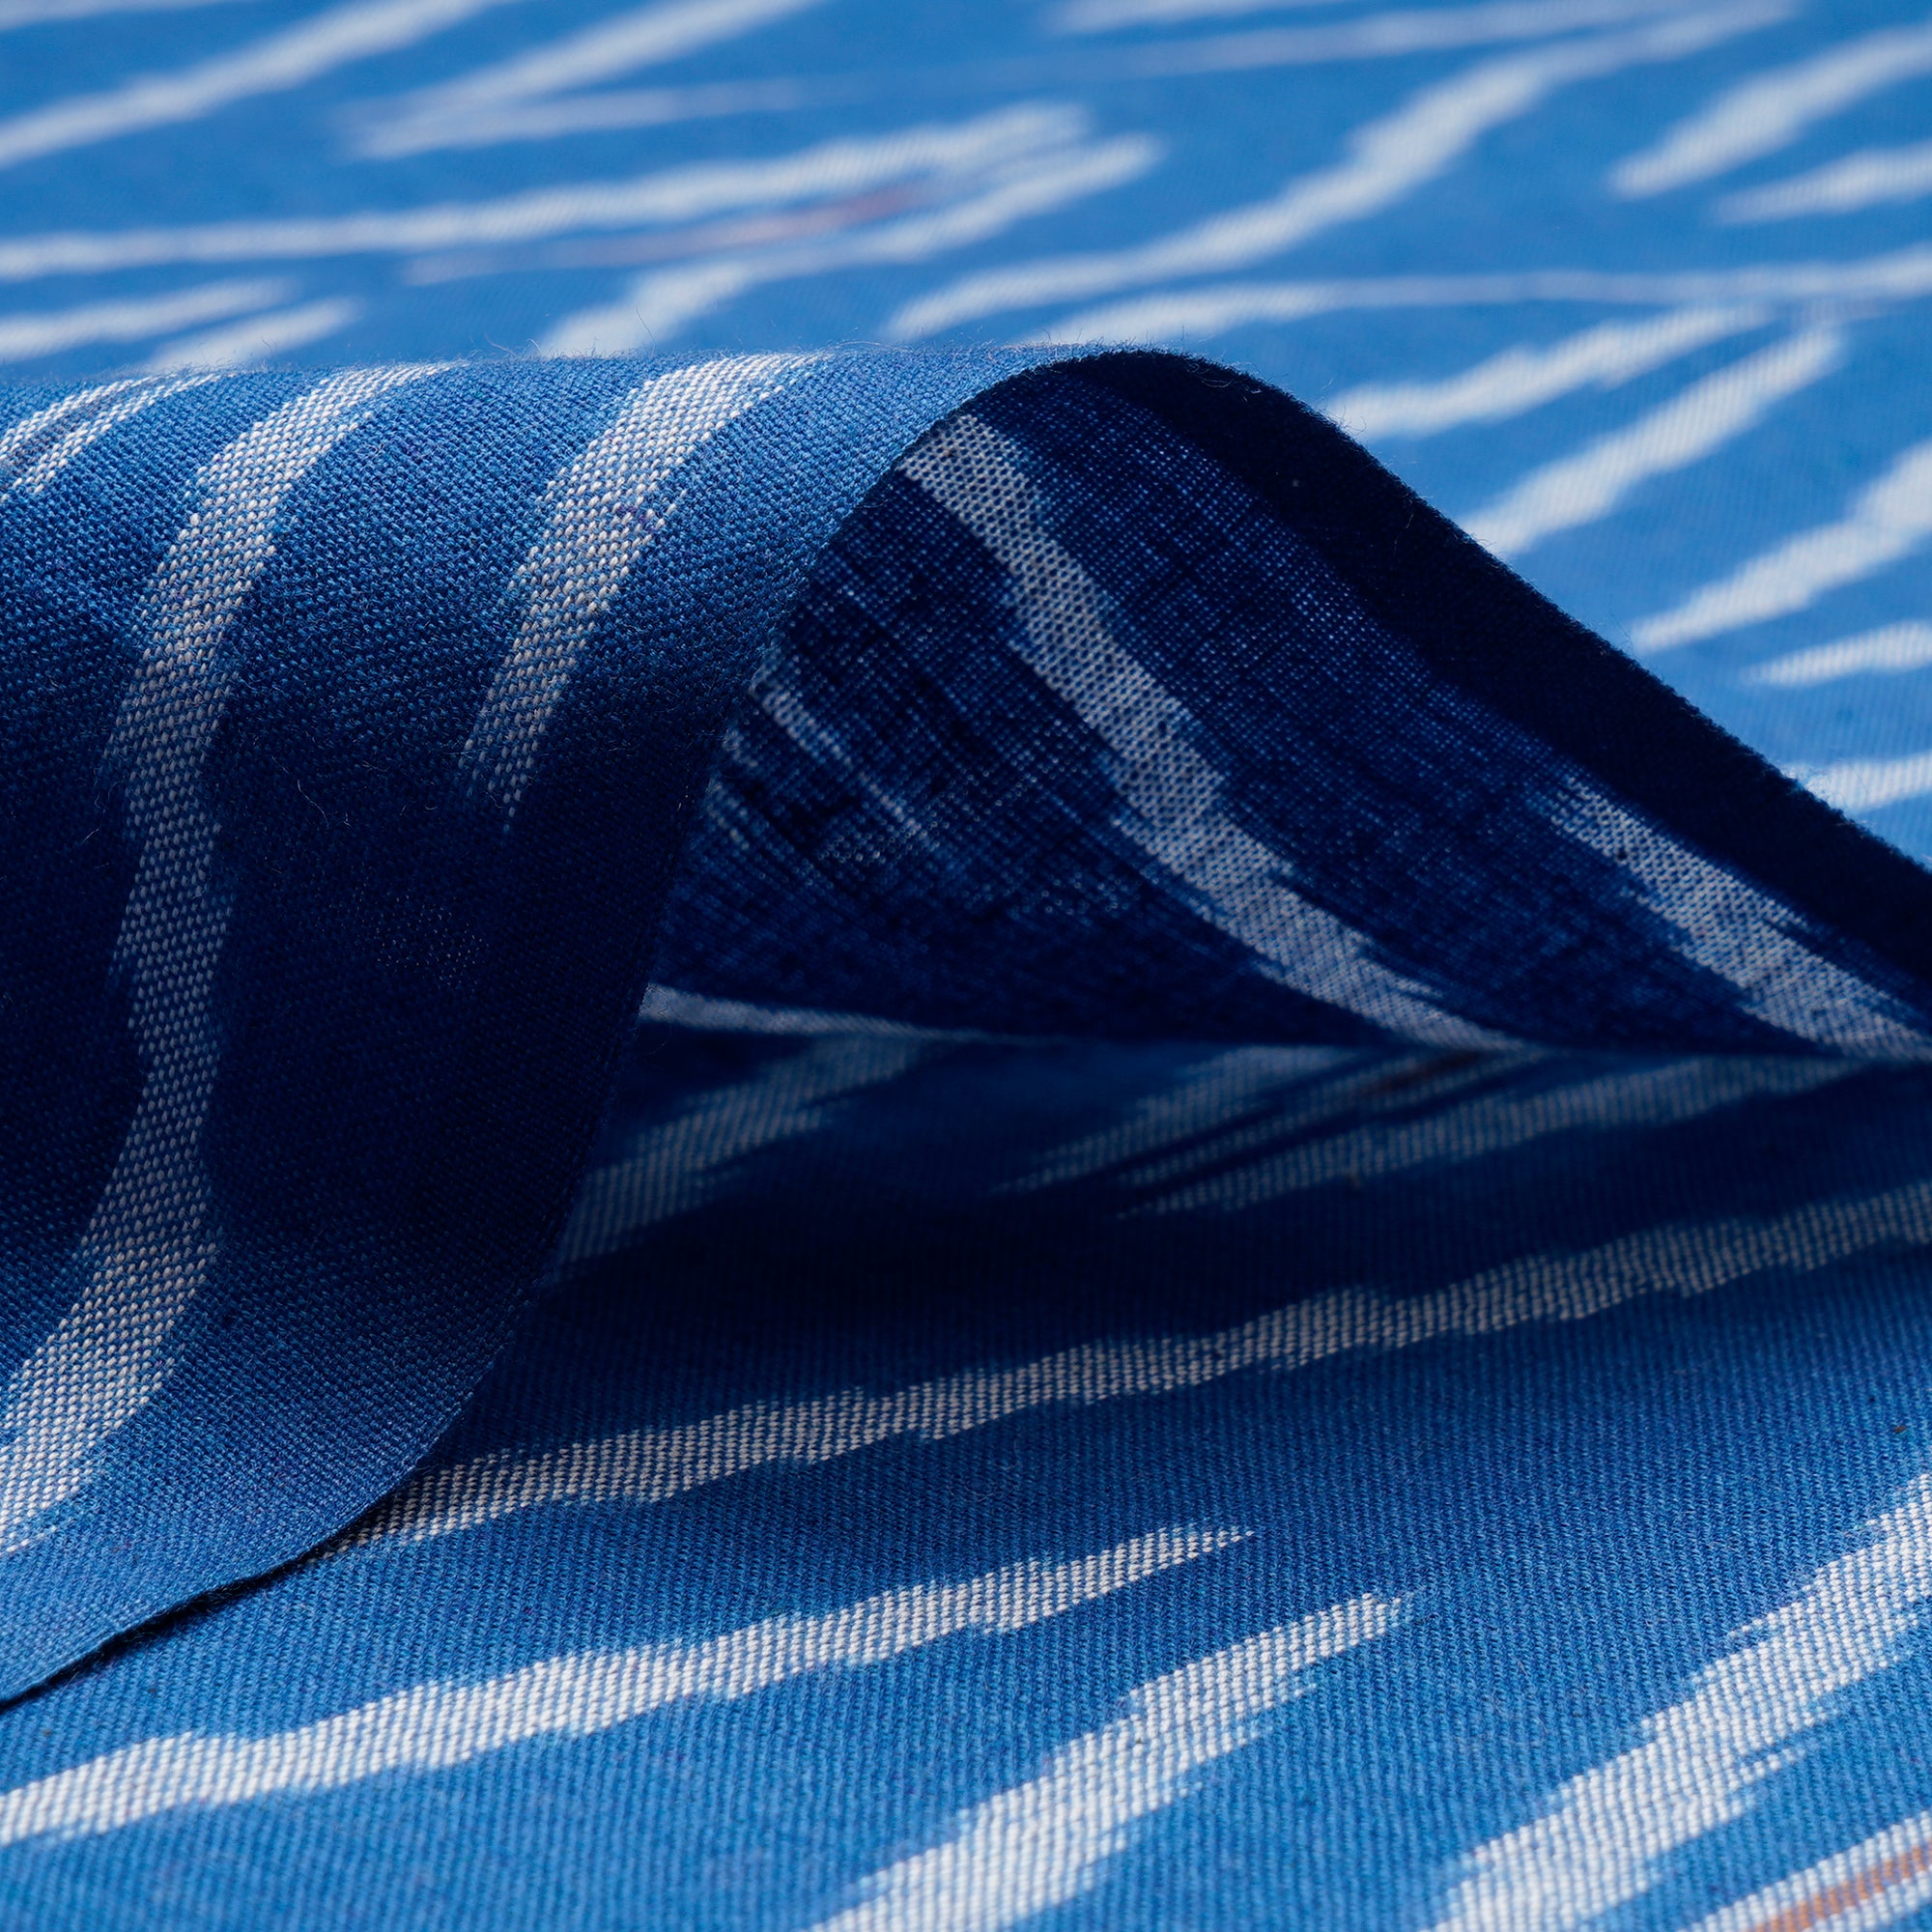 Blue 2/60 Washed Woven Ikat Cotton Fabric